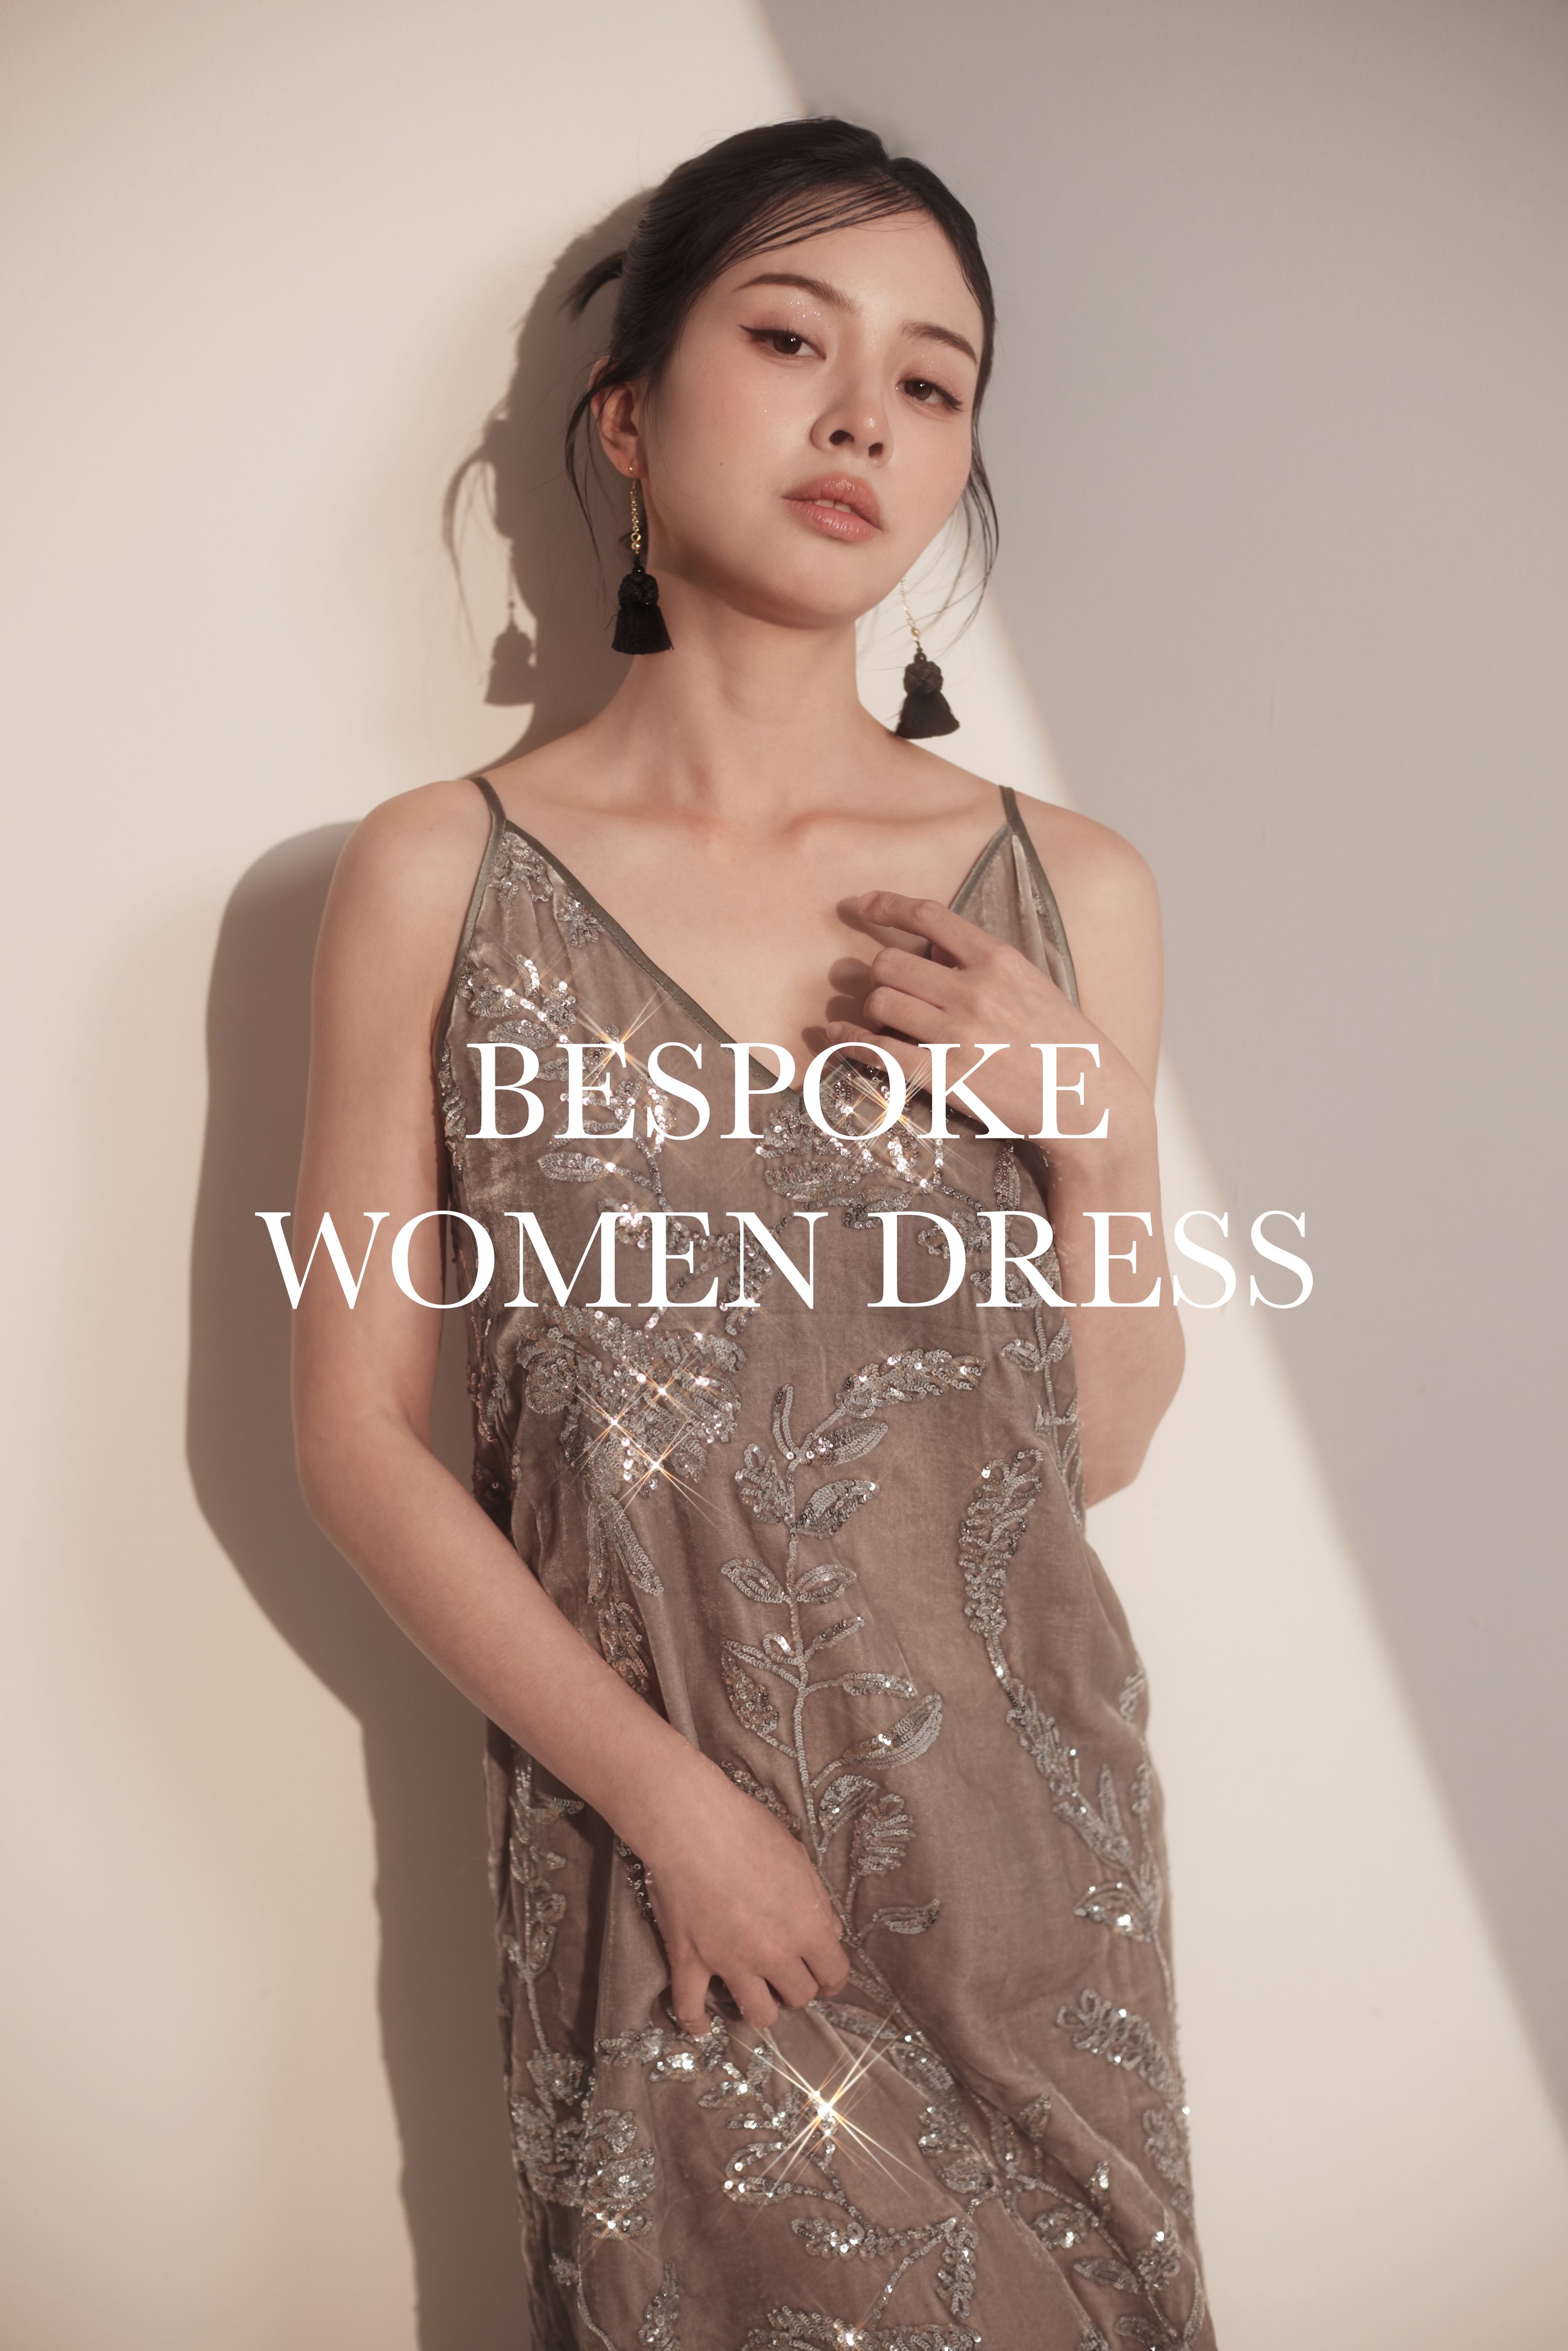 Bespoke Women Dress Made Suits Singapore tailor made suits bespoke tailor singapore suits ESCORIAL Standeven Made Suits Commonsuits sucks.jpg